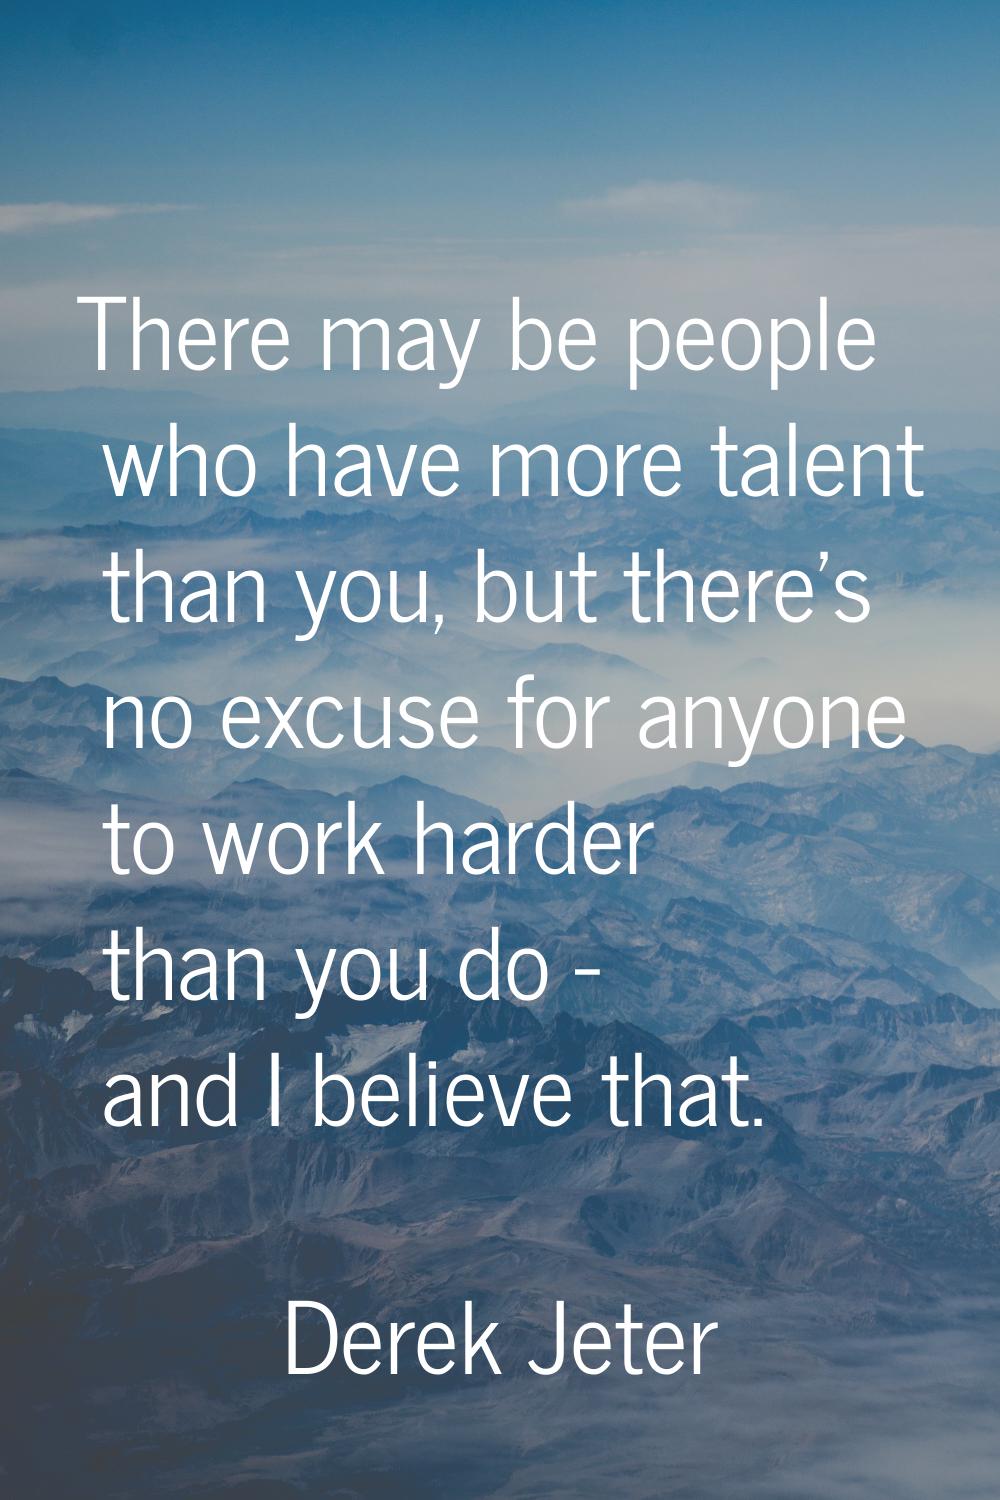 There may be people who have more talent than you, but there's no excuse for anyone to work harder 